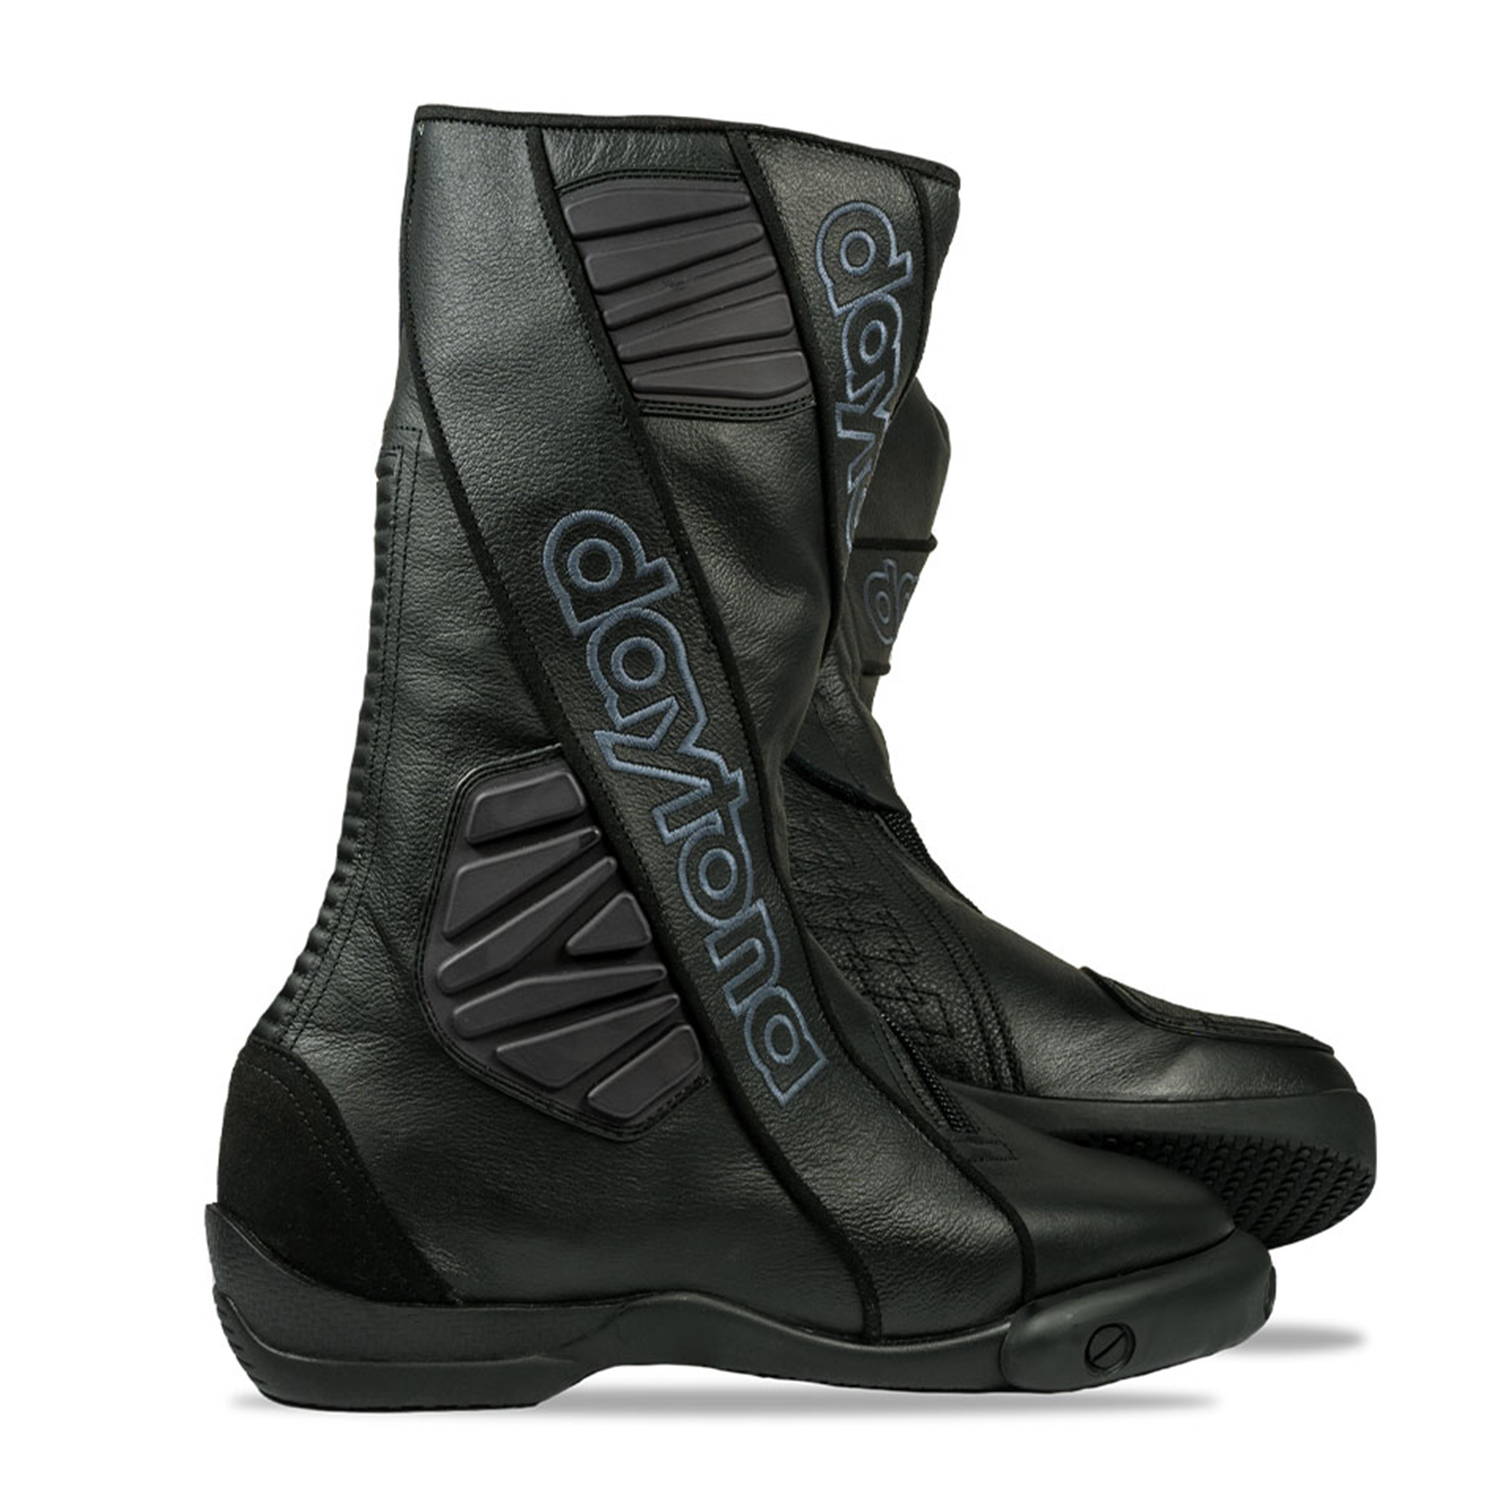 Daytona Security EVO G3 Boots Black - Available in Various Sizes